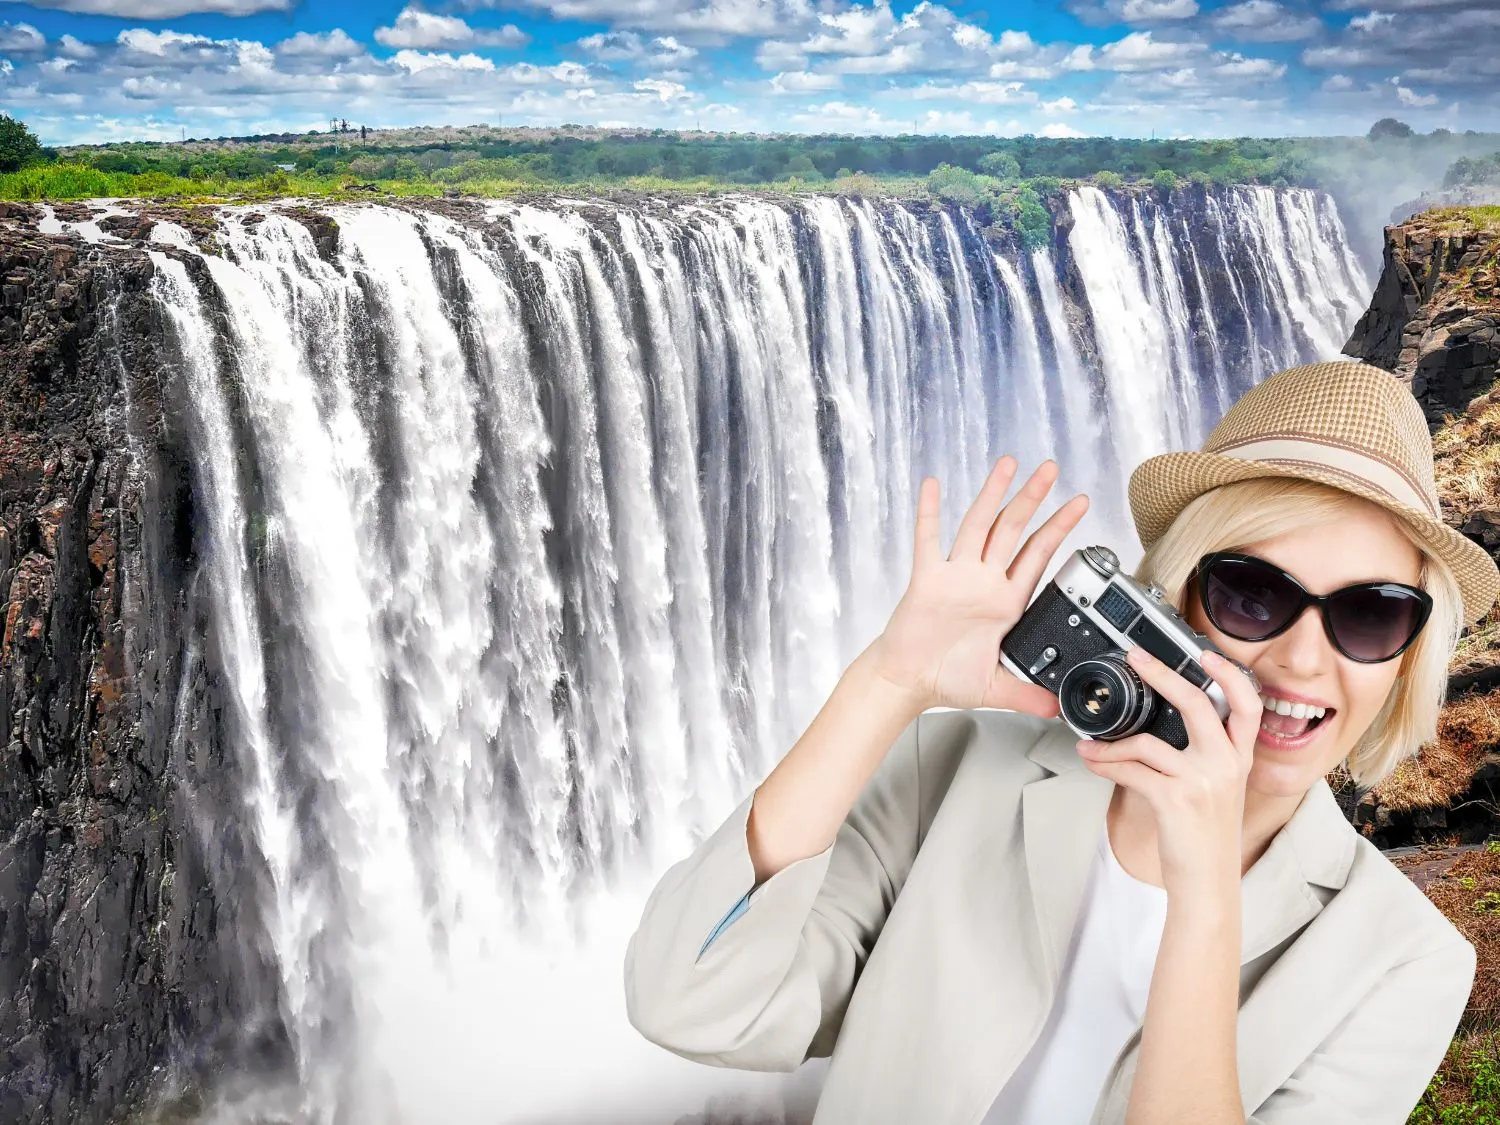 The 6 Best Zimbabwe Tours For Unforgettable Adventures That Are Achievable & Affordable